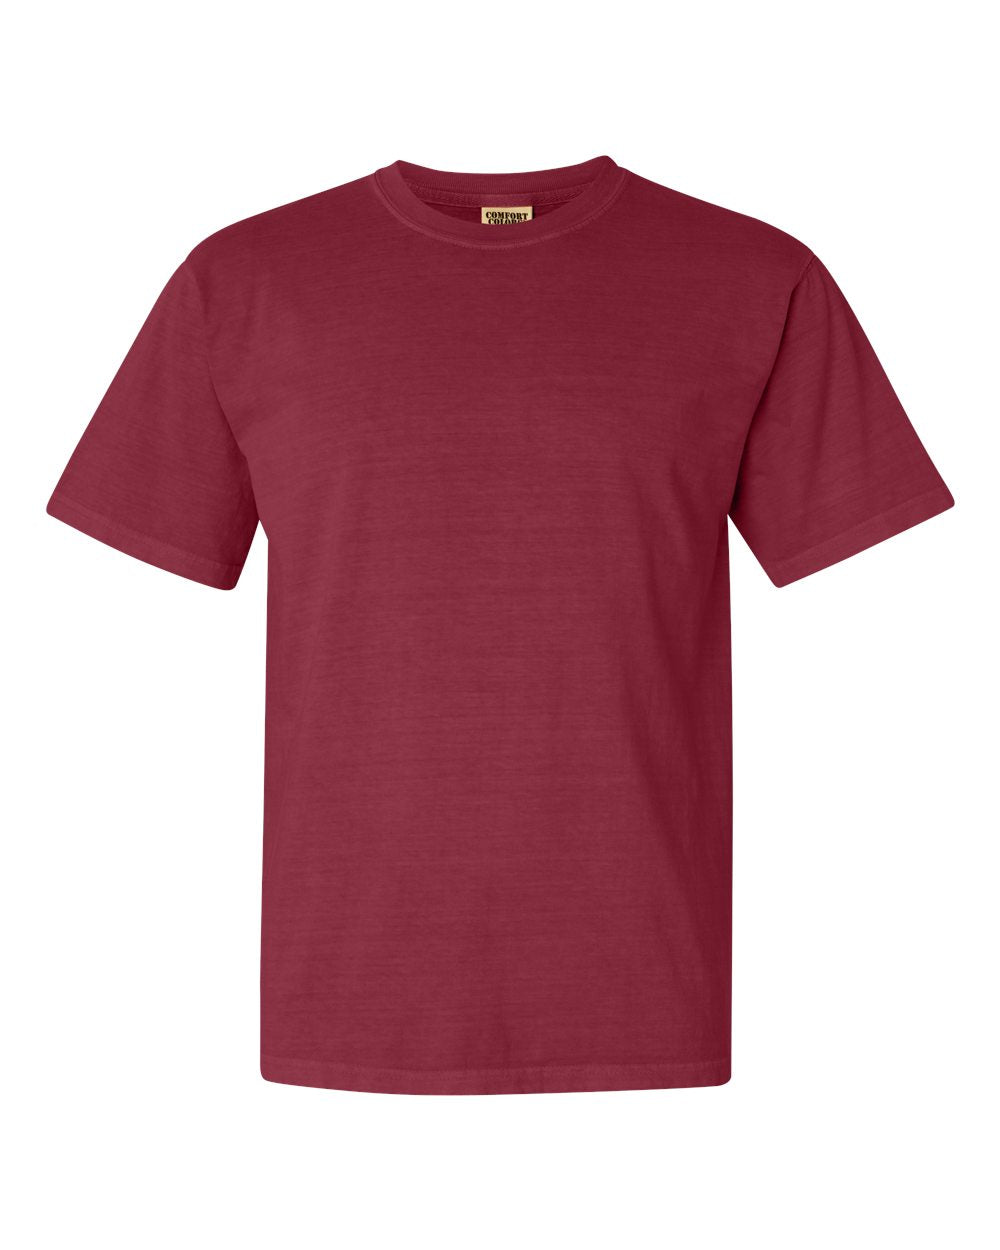 Comfort Colors Garment-Dyed Tee (1717) in Chili